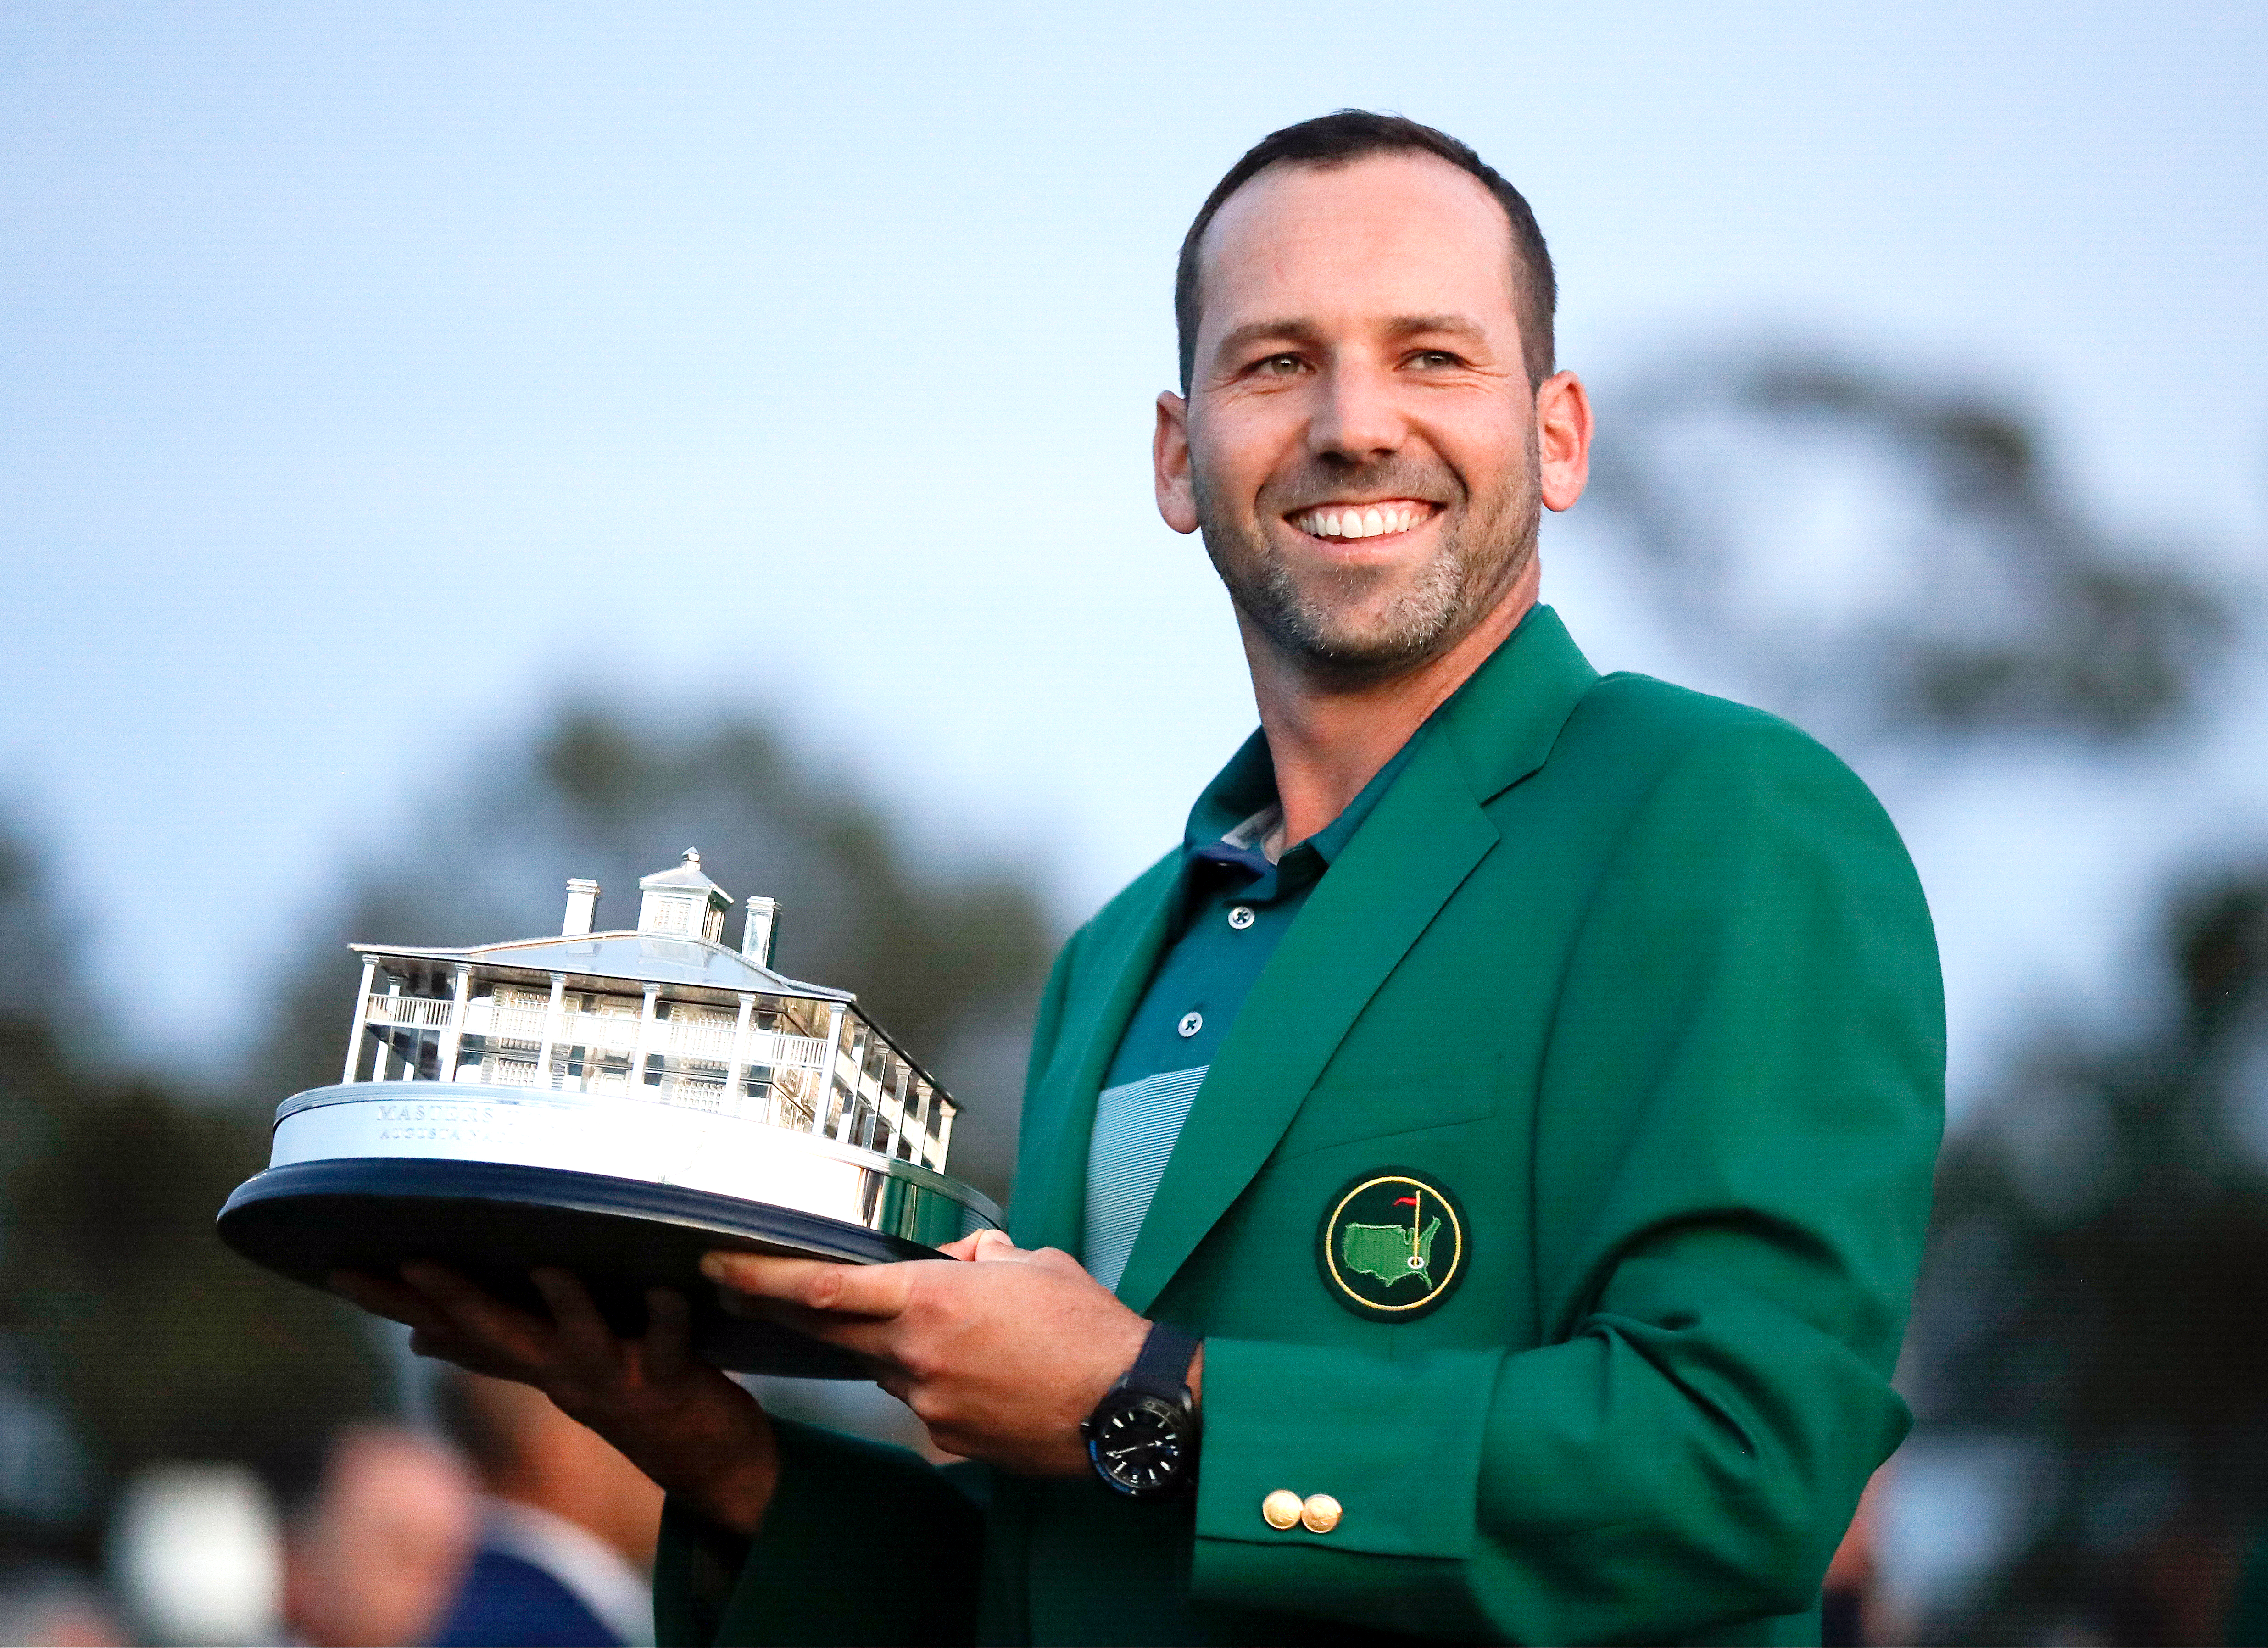 Sergio Garcia, of Spain, holds his trophy at the green jacket ceremony after the Masters golf tournament Sunday, April 9, in Augusta, Ga. (AP Photo/David Goldman)